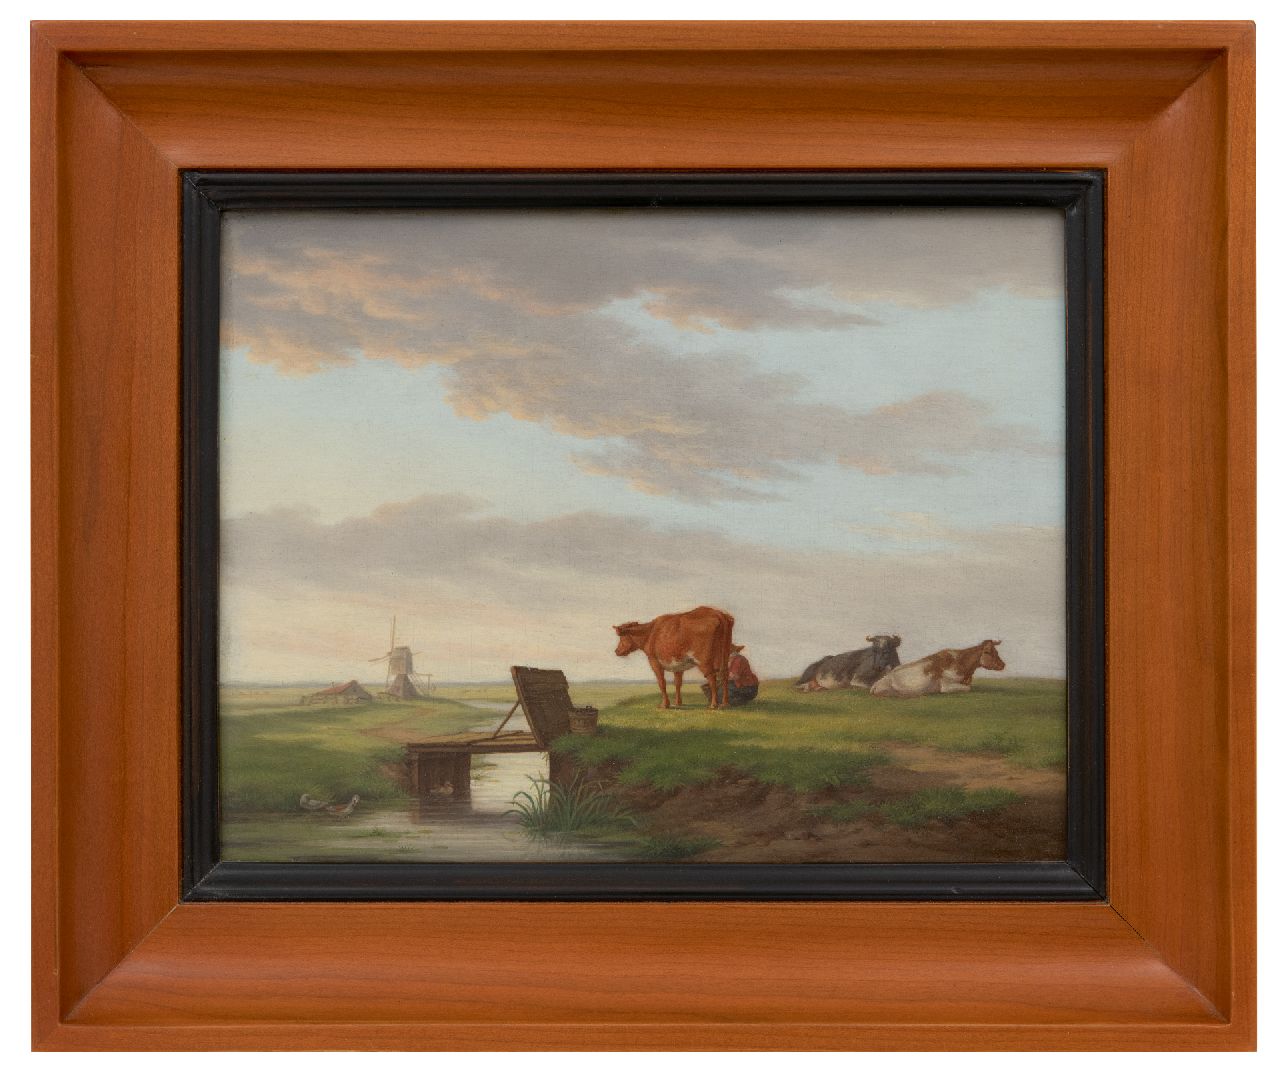 Burgh H.A. van der | Hendrik Adam van der Burgh | Paintings offered for sale | Cows in a landscape with a mill, oil on panel 20.4 x 26.3 cm, signed l.r. and painted 1821